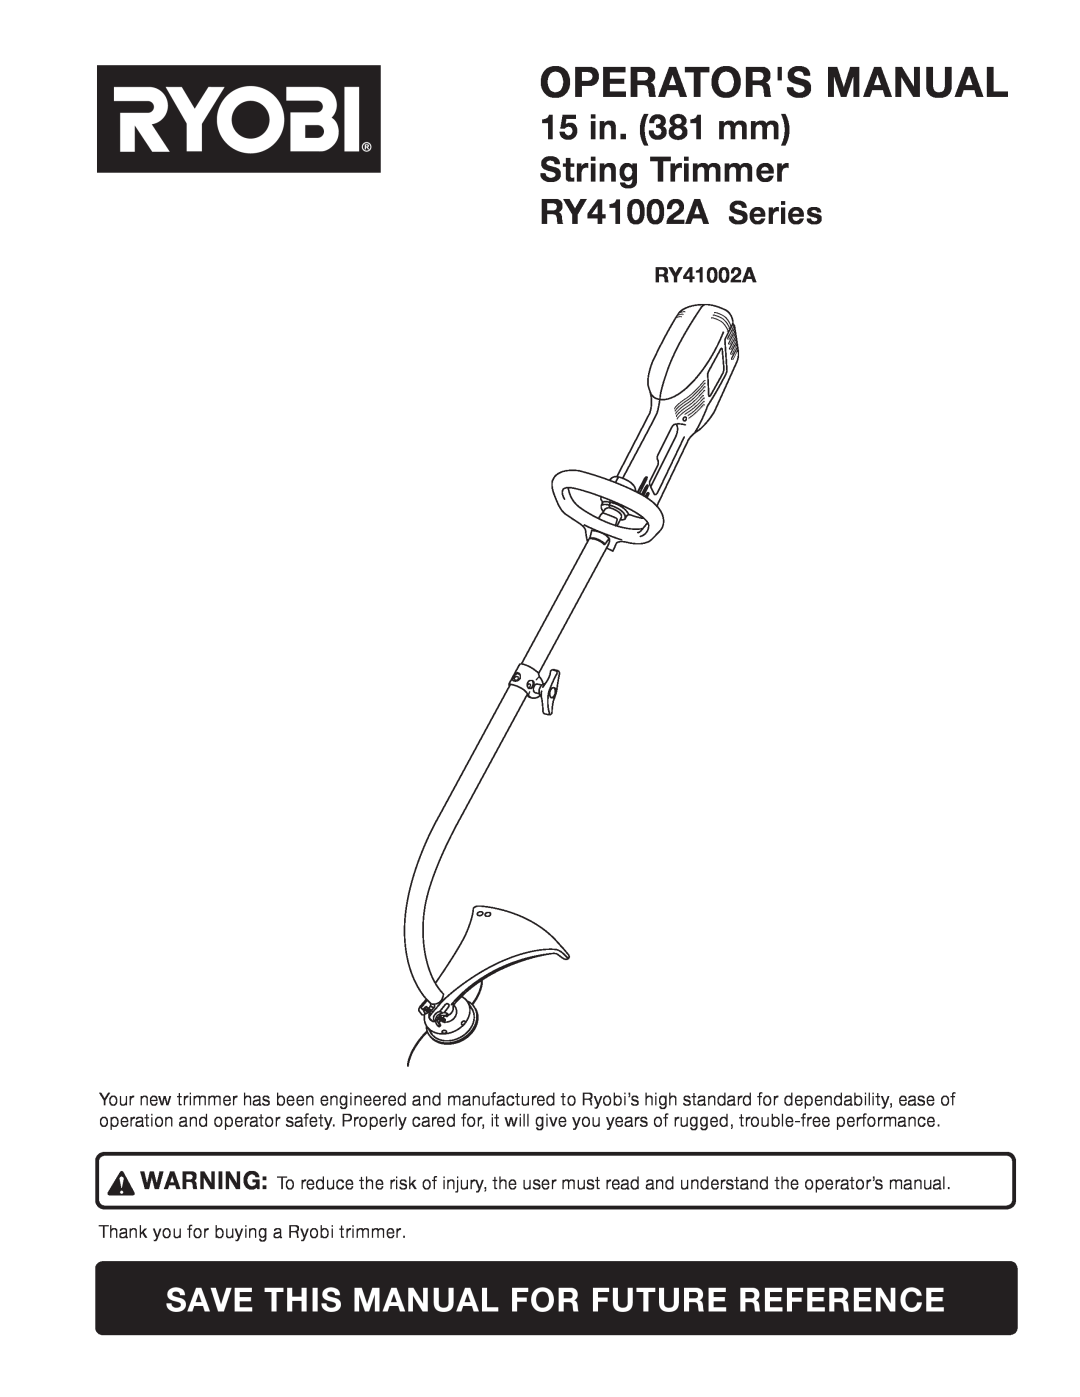 Ryobi manual Operators Manual, 15 in. 381 mm String Trimmer RY41002A Series, Save This Manual For Future Reference 